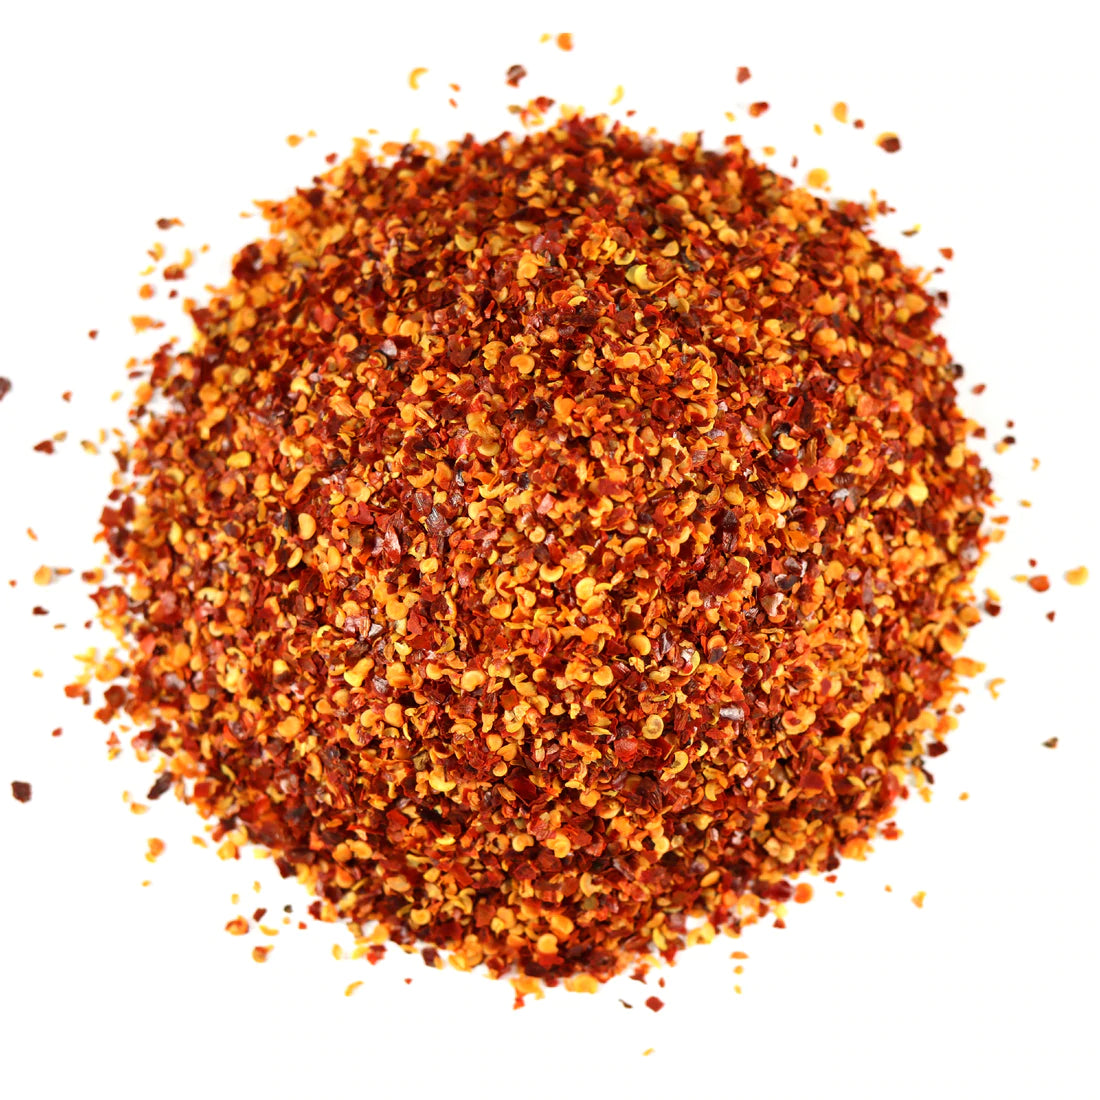 
                  
                    Crushed Red Pepper
                  
                